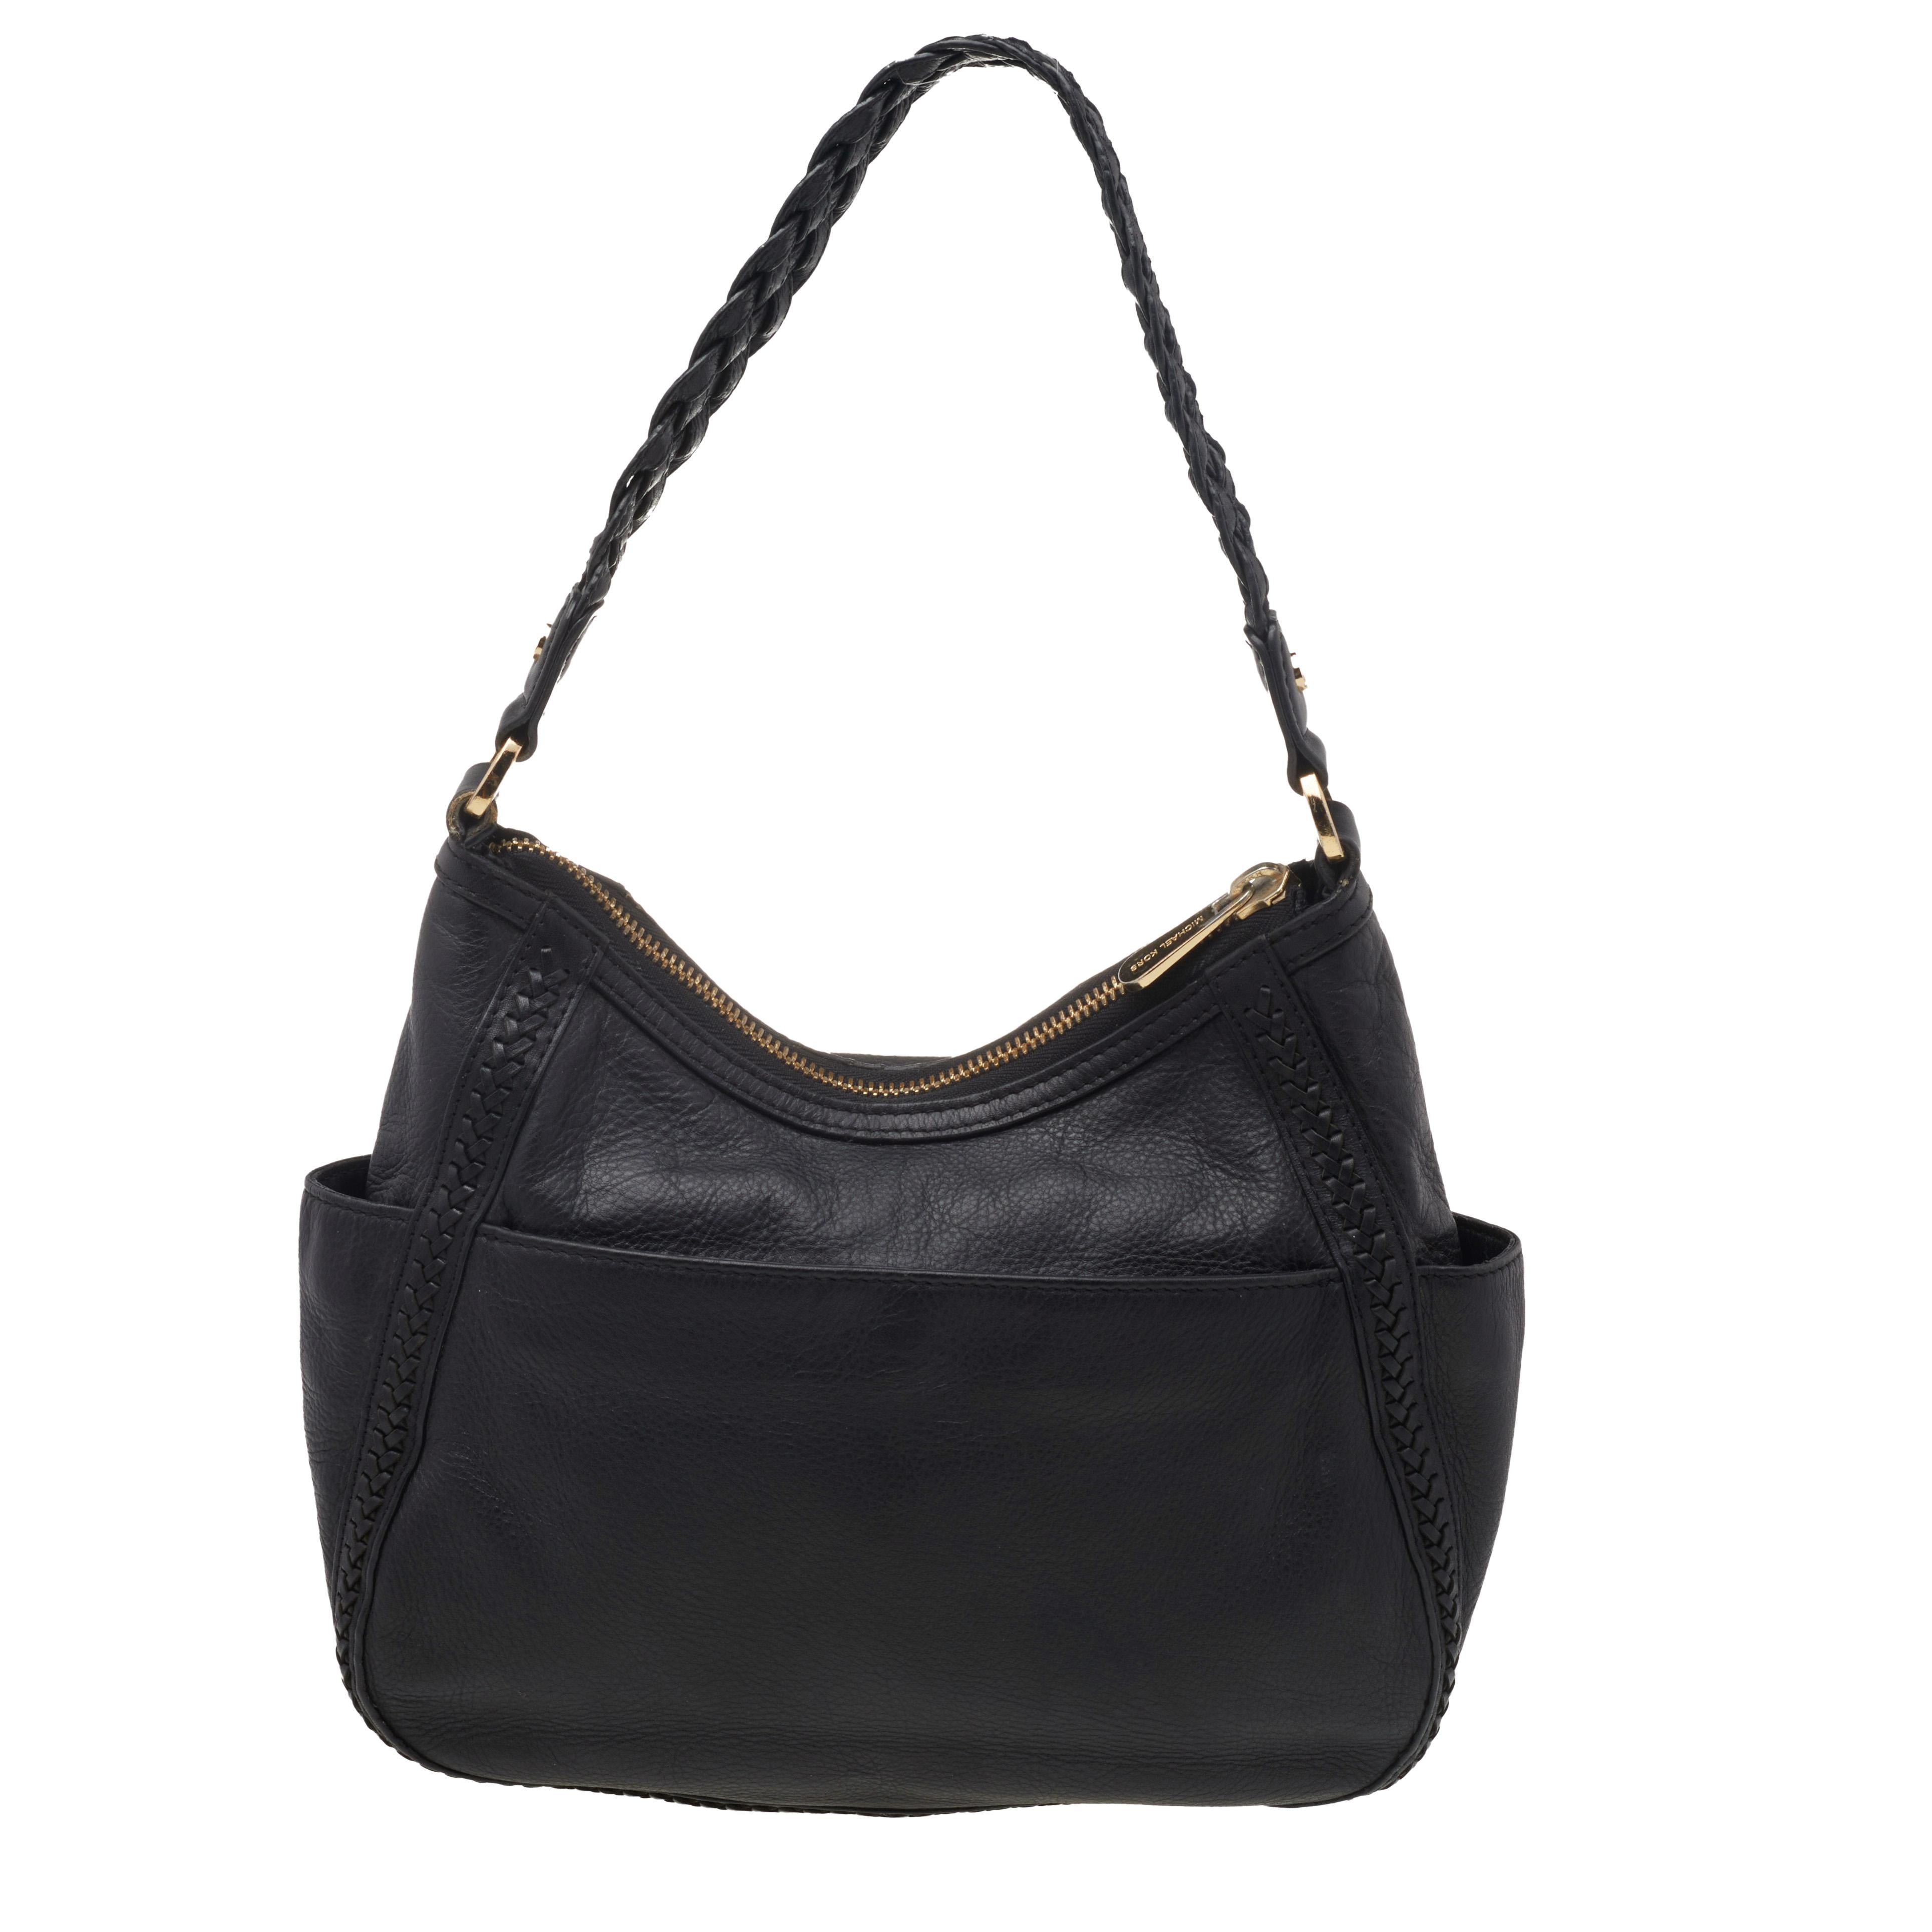 You will always find a time and occasion to pair this stunning MICHAEL Michael Kors piece. Crafted in black leather, this hobo features gold-tone hardware, logo detailing, a braided handle, and a spacious fabric-lined interior to add to the utility